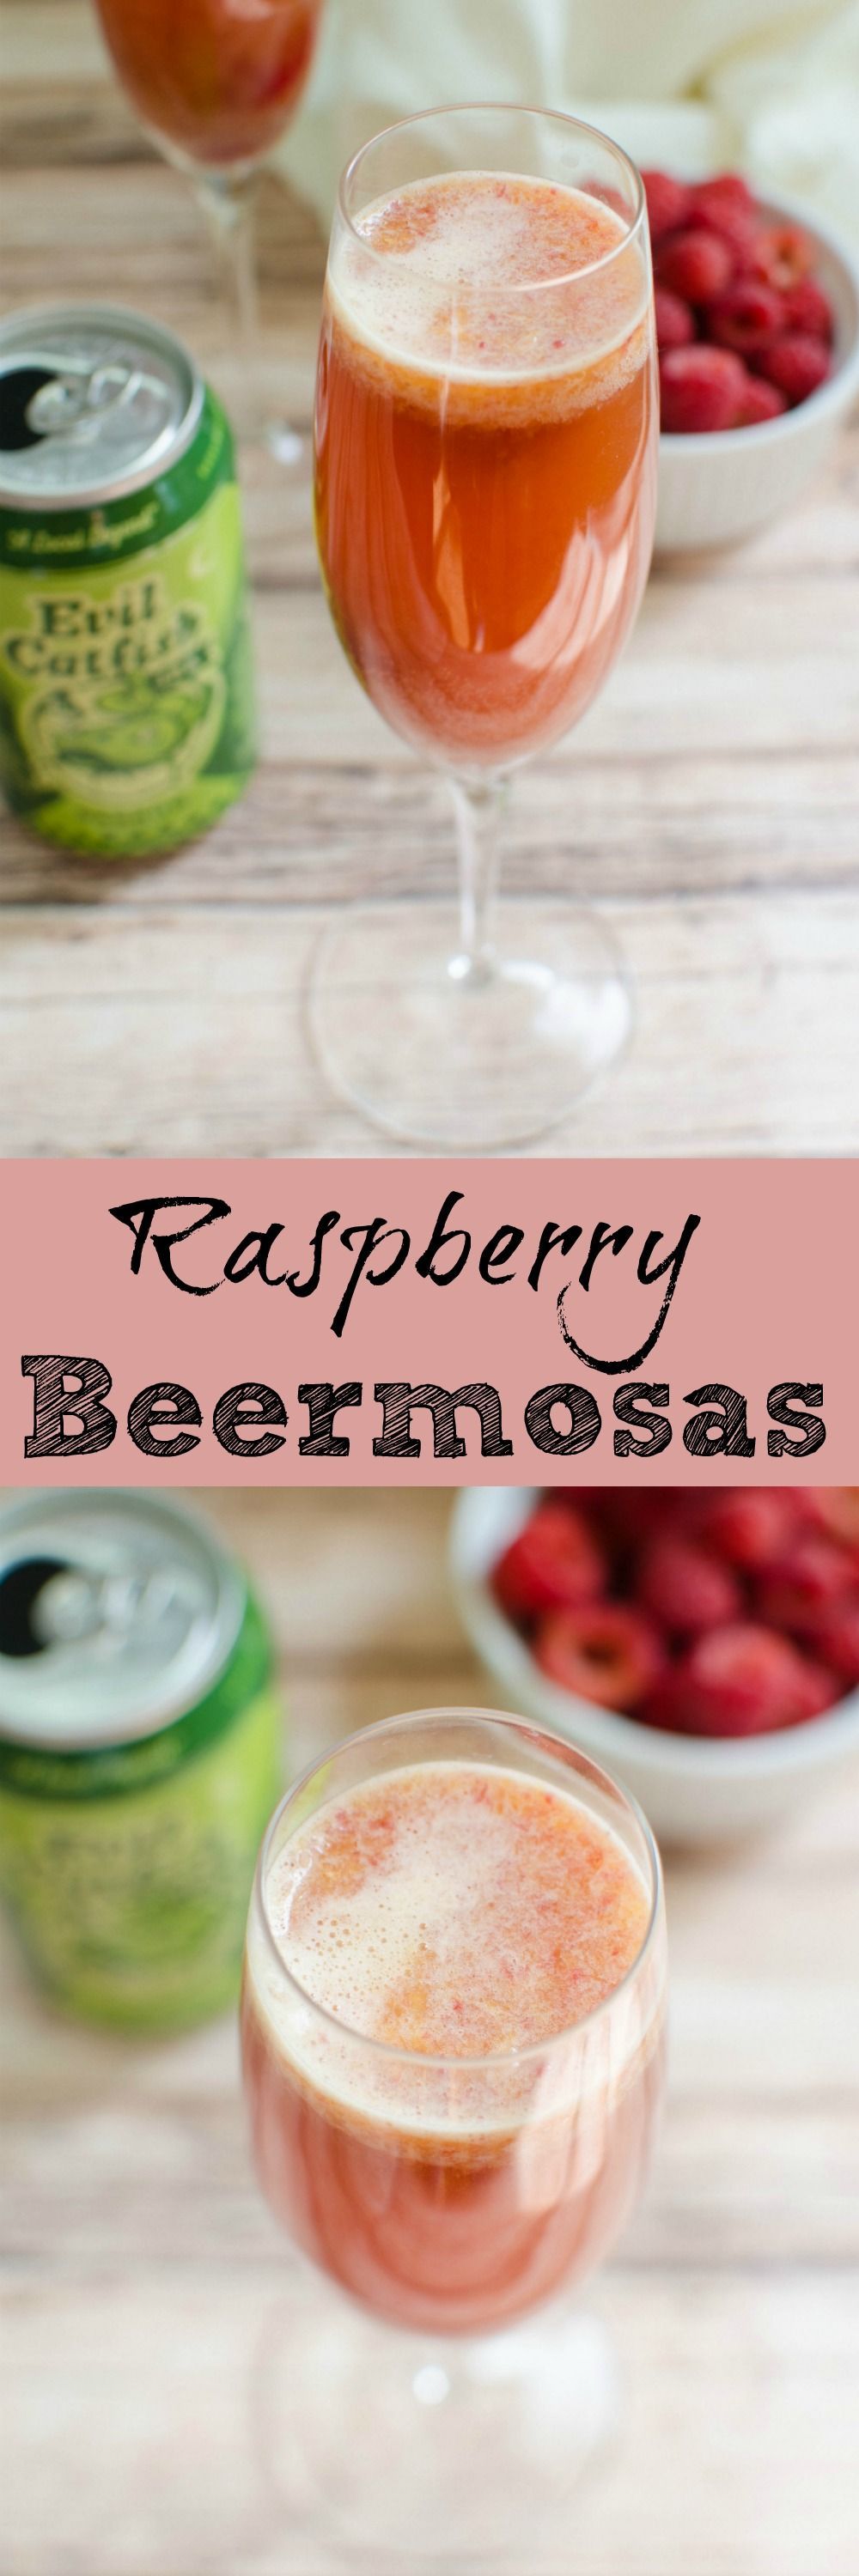 Raspberry Beermosas – the perfect brunch cocktail for beer lovers! Fresh raspberries, orange juice, and your fave beer make the